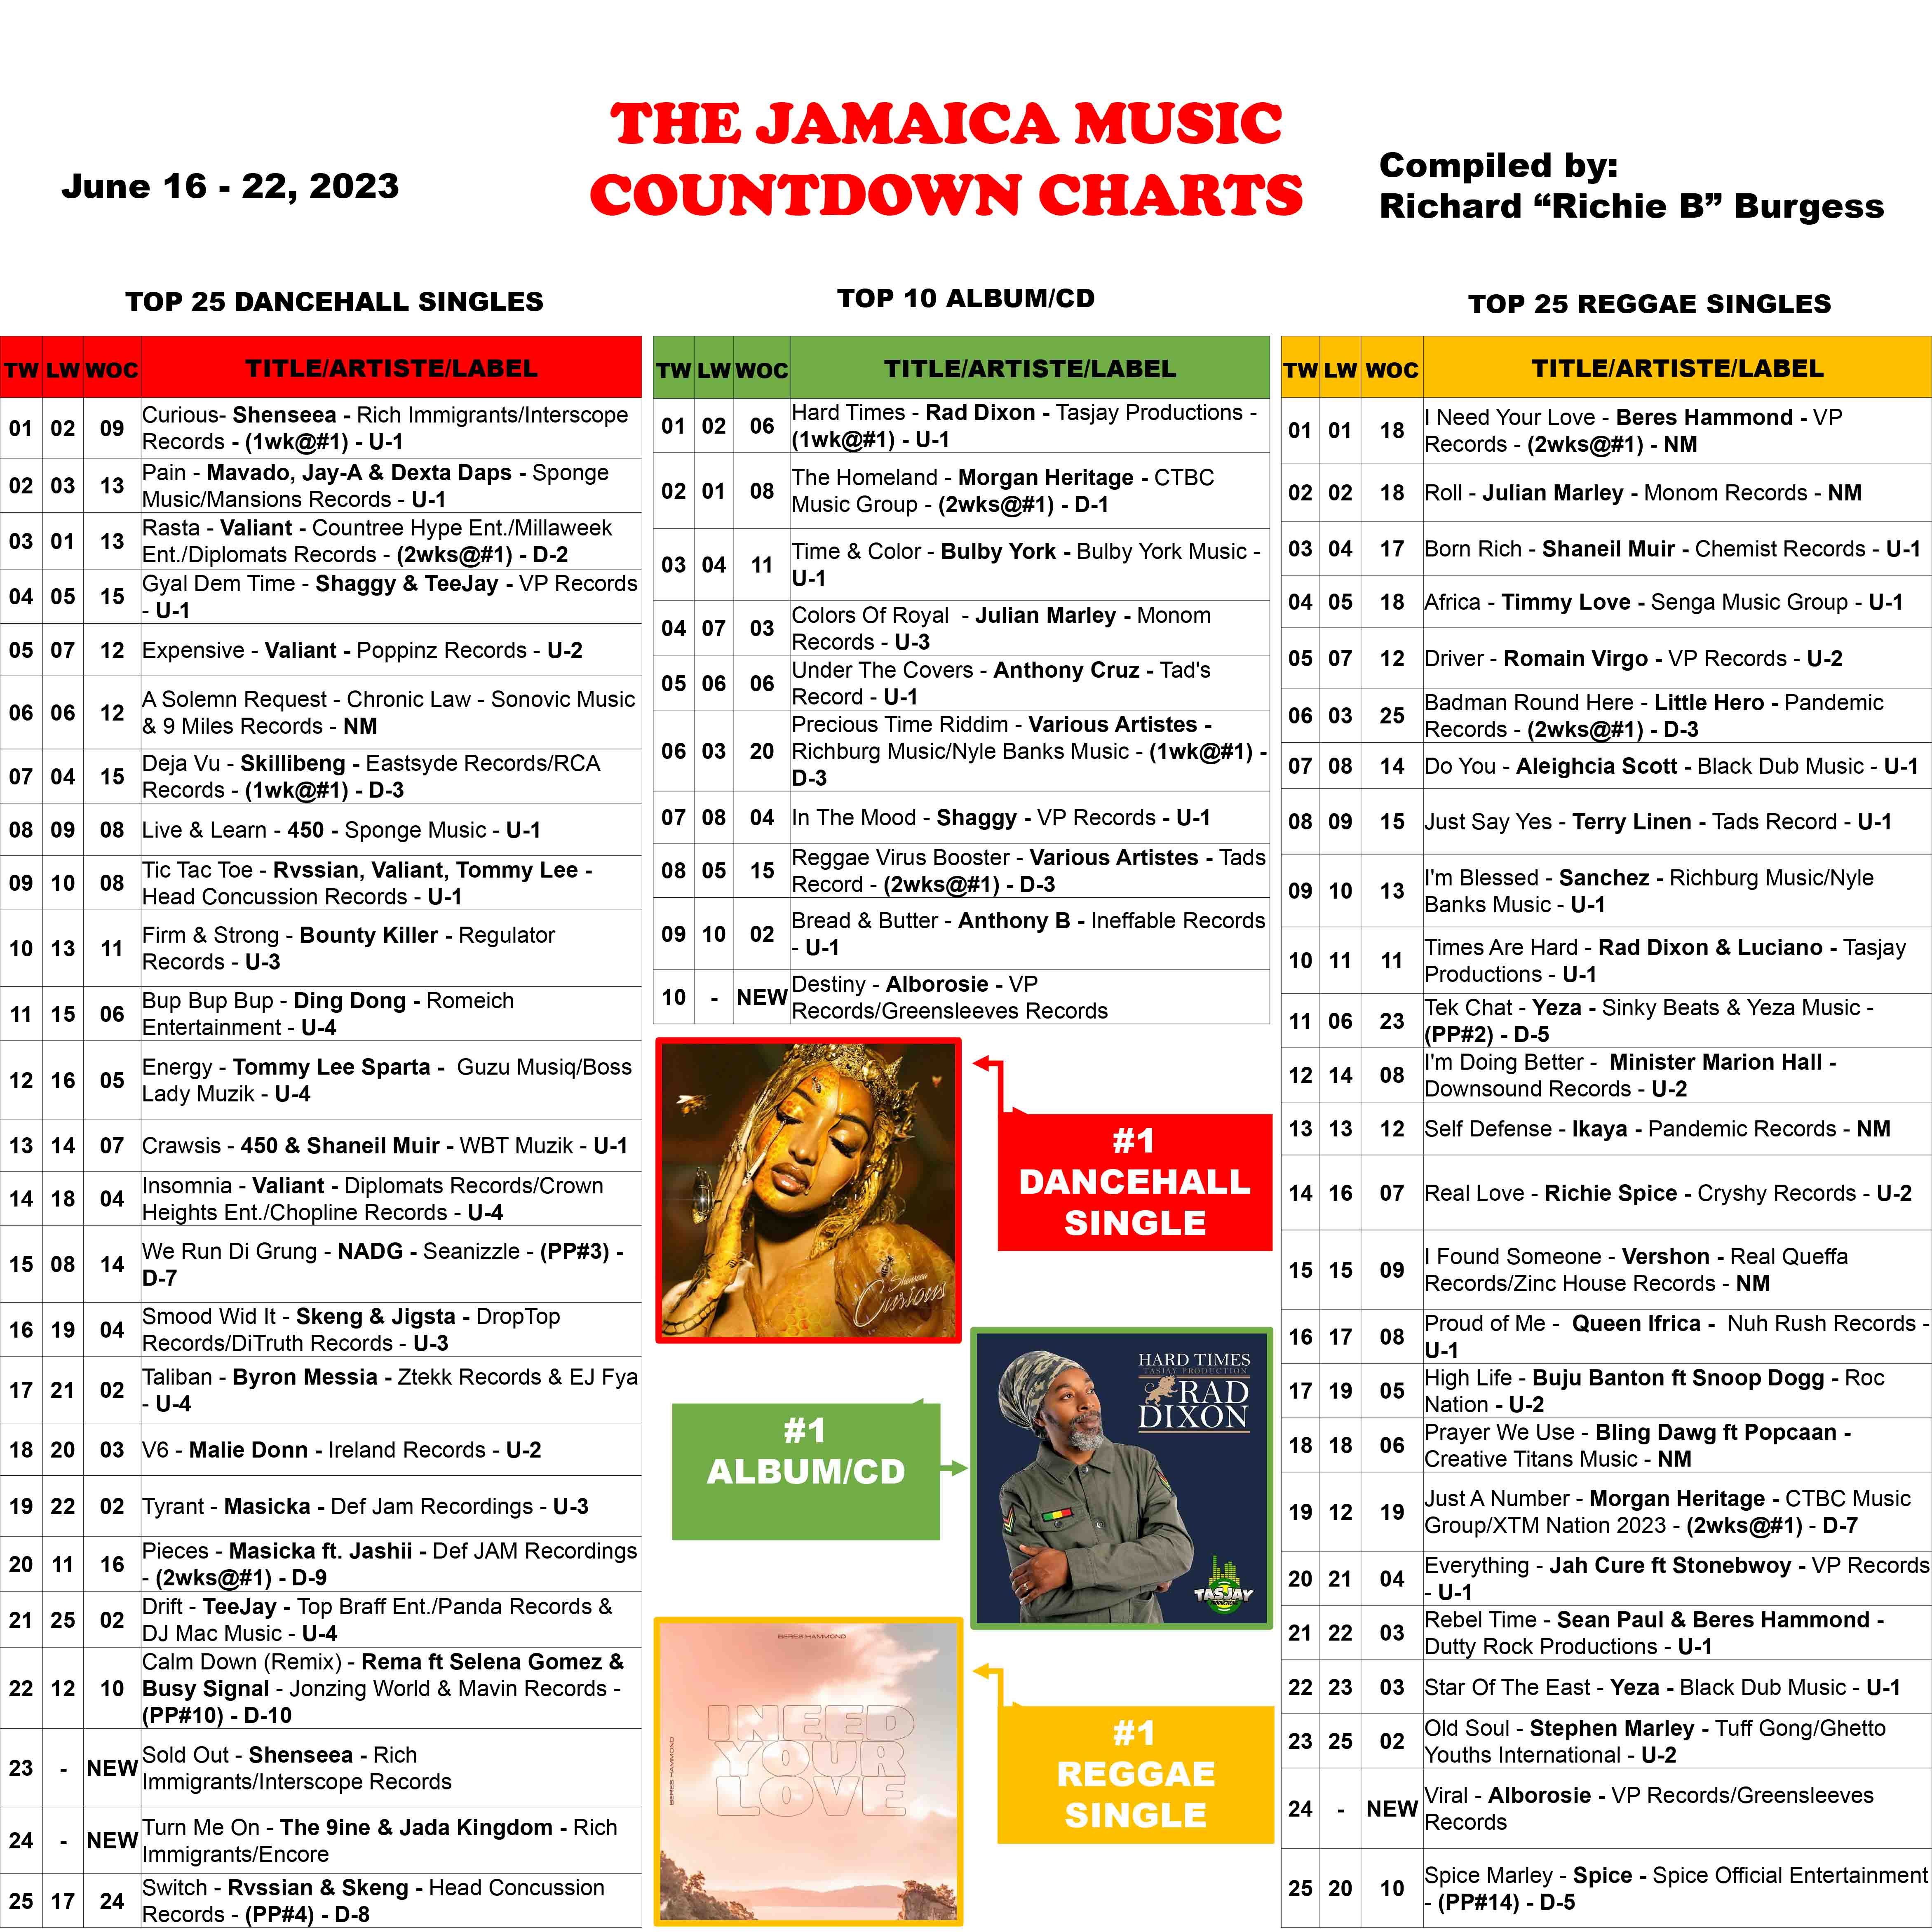 The Jamaica Music Countdown Charts compile the top Dancehall and Reggae songs in Jamaica on a weekly basis.